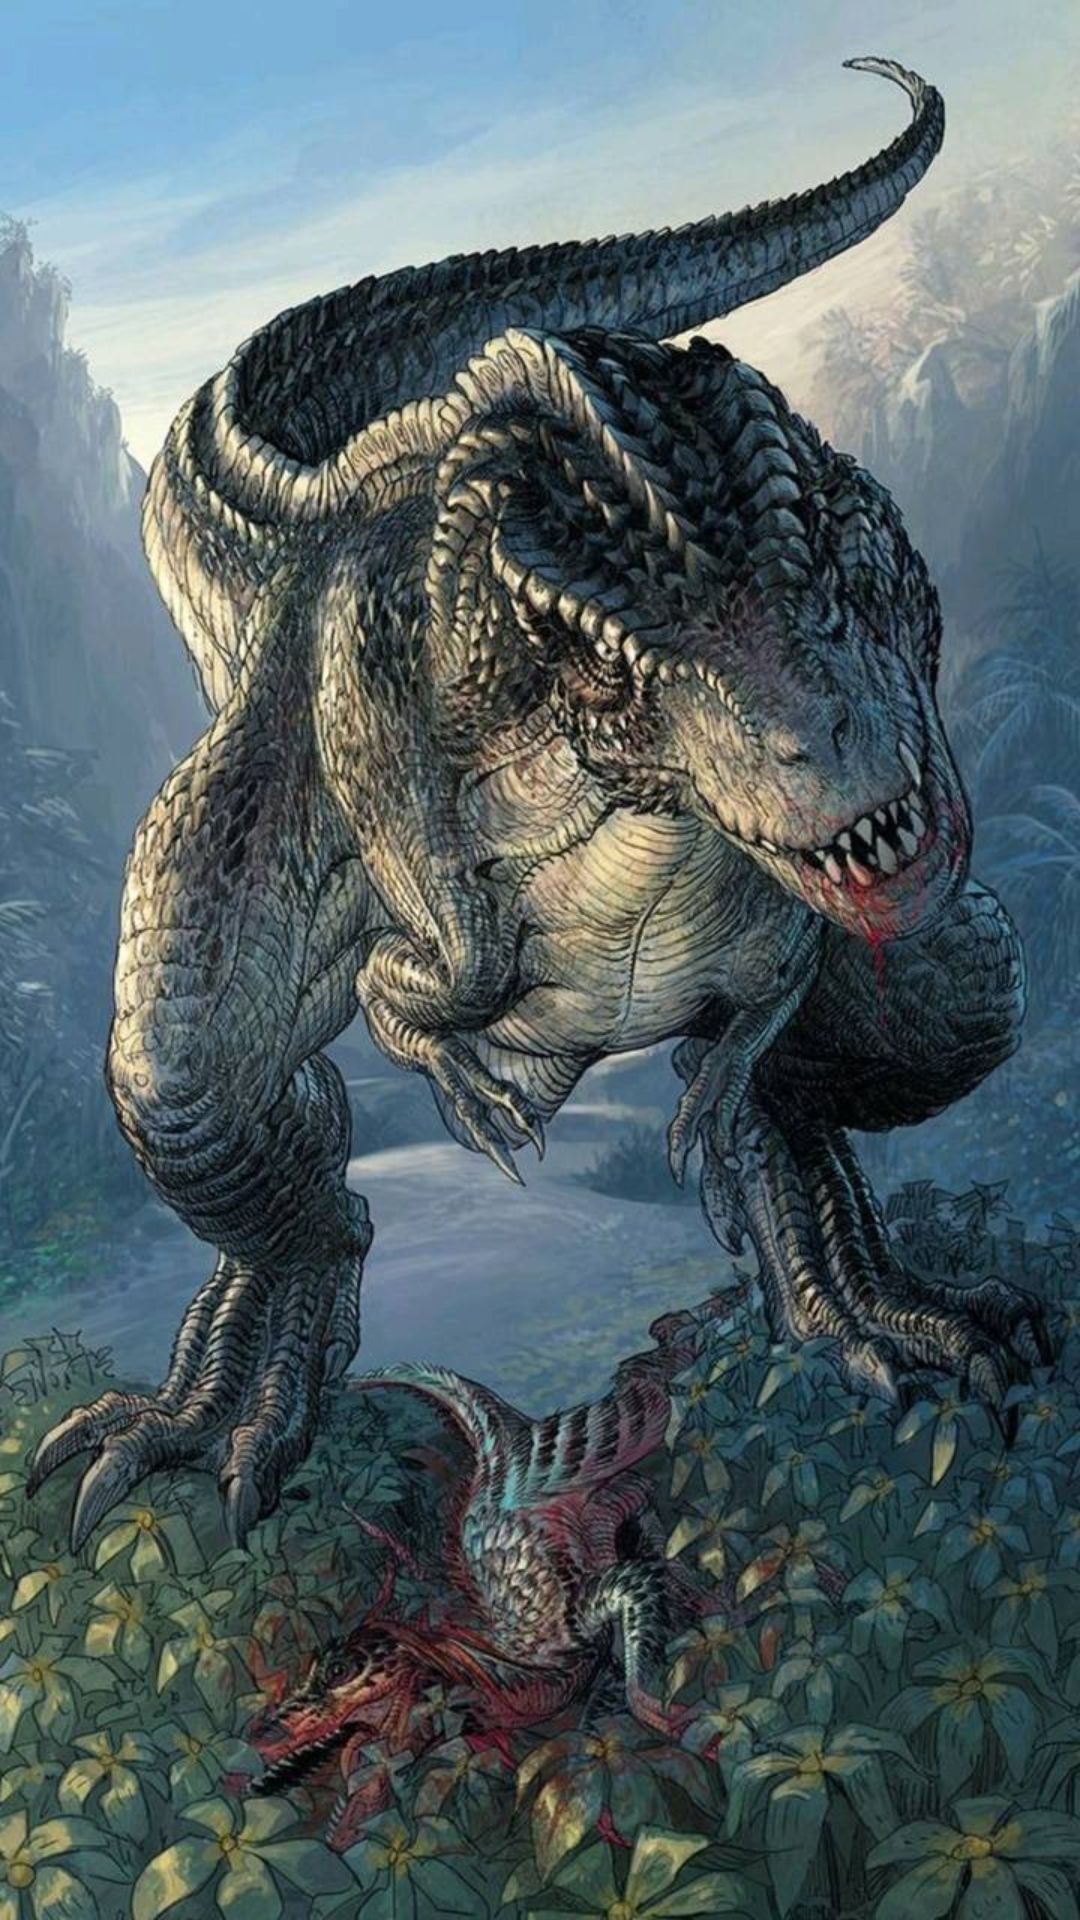 Best dinosaur wallpapers, High-definition images, Stunning backgrounds, Dinosaur enthusiasts, 1080x1920 Full HD Handy